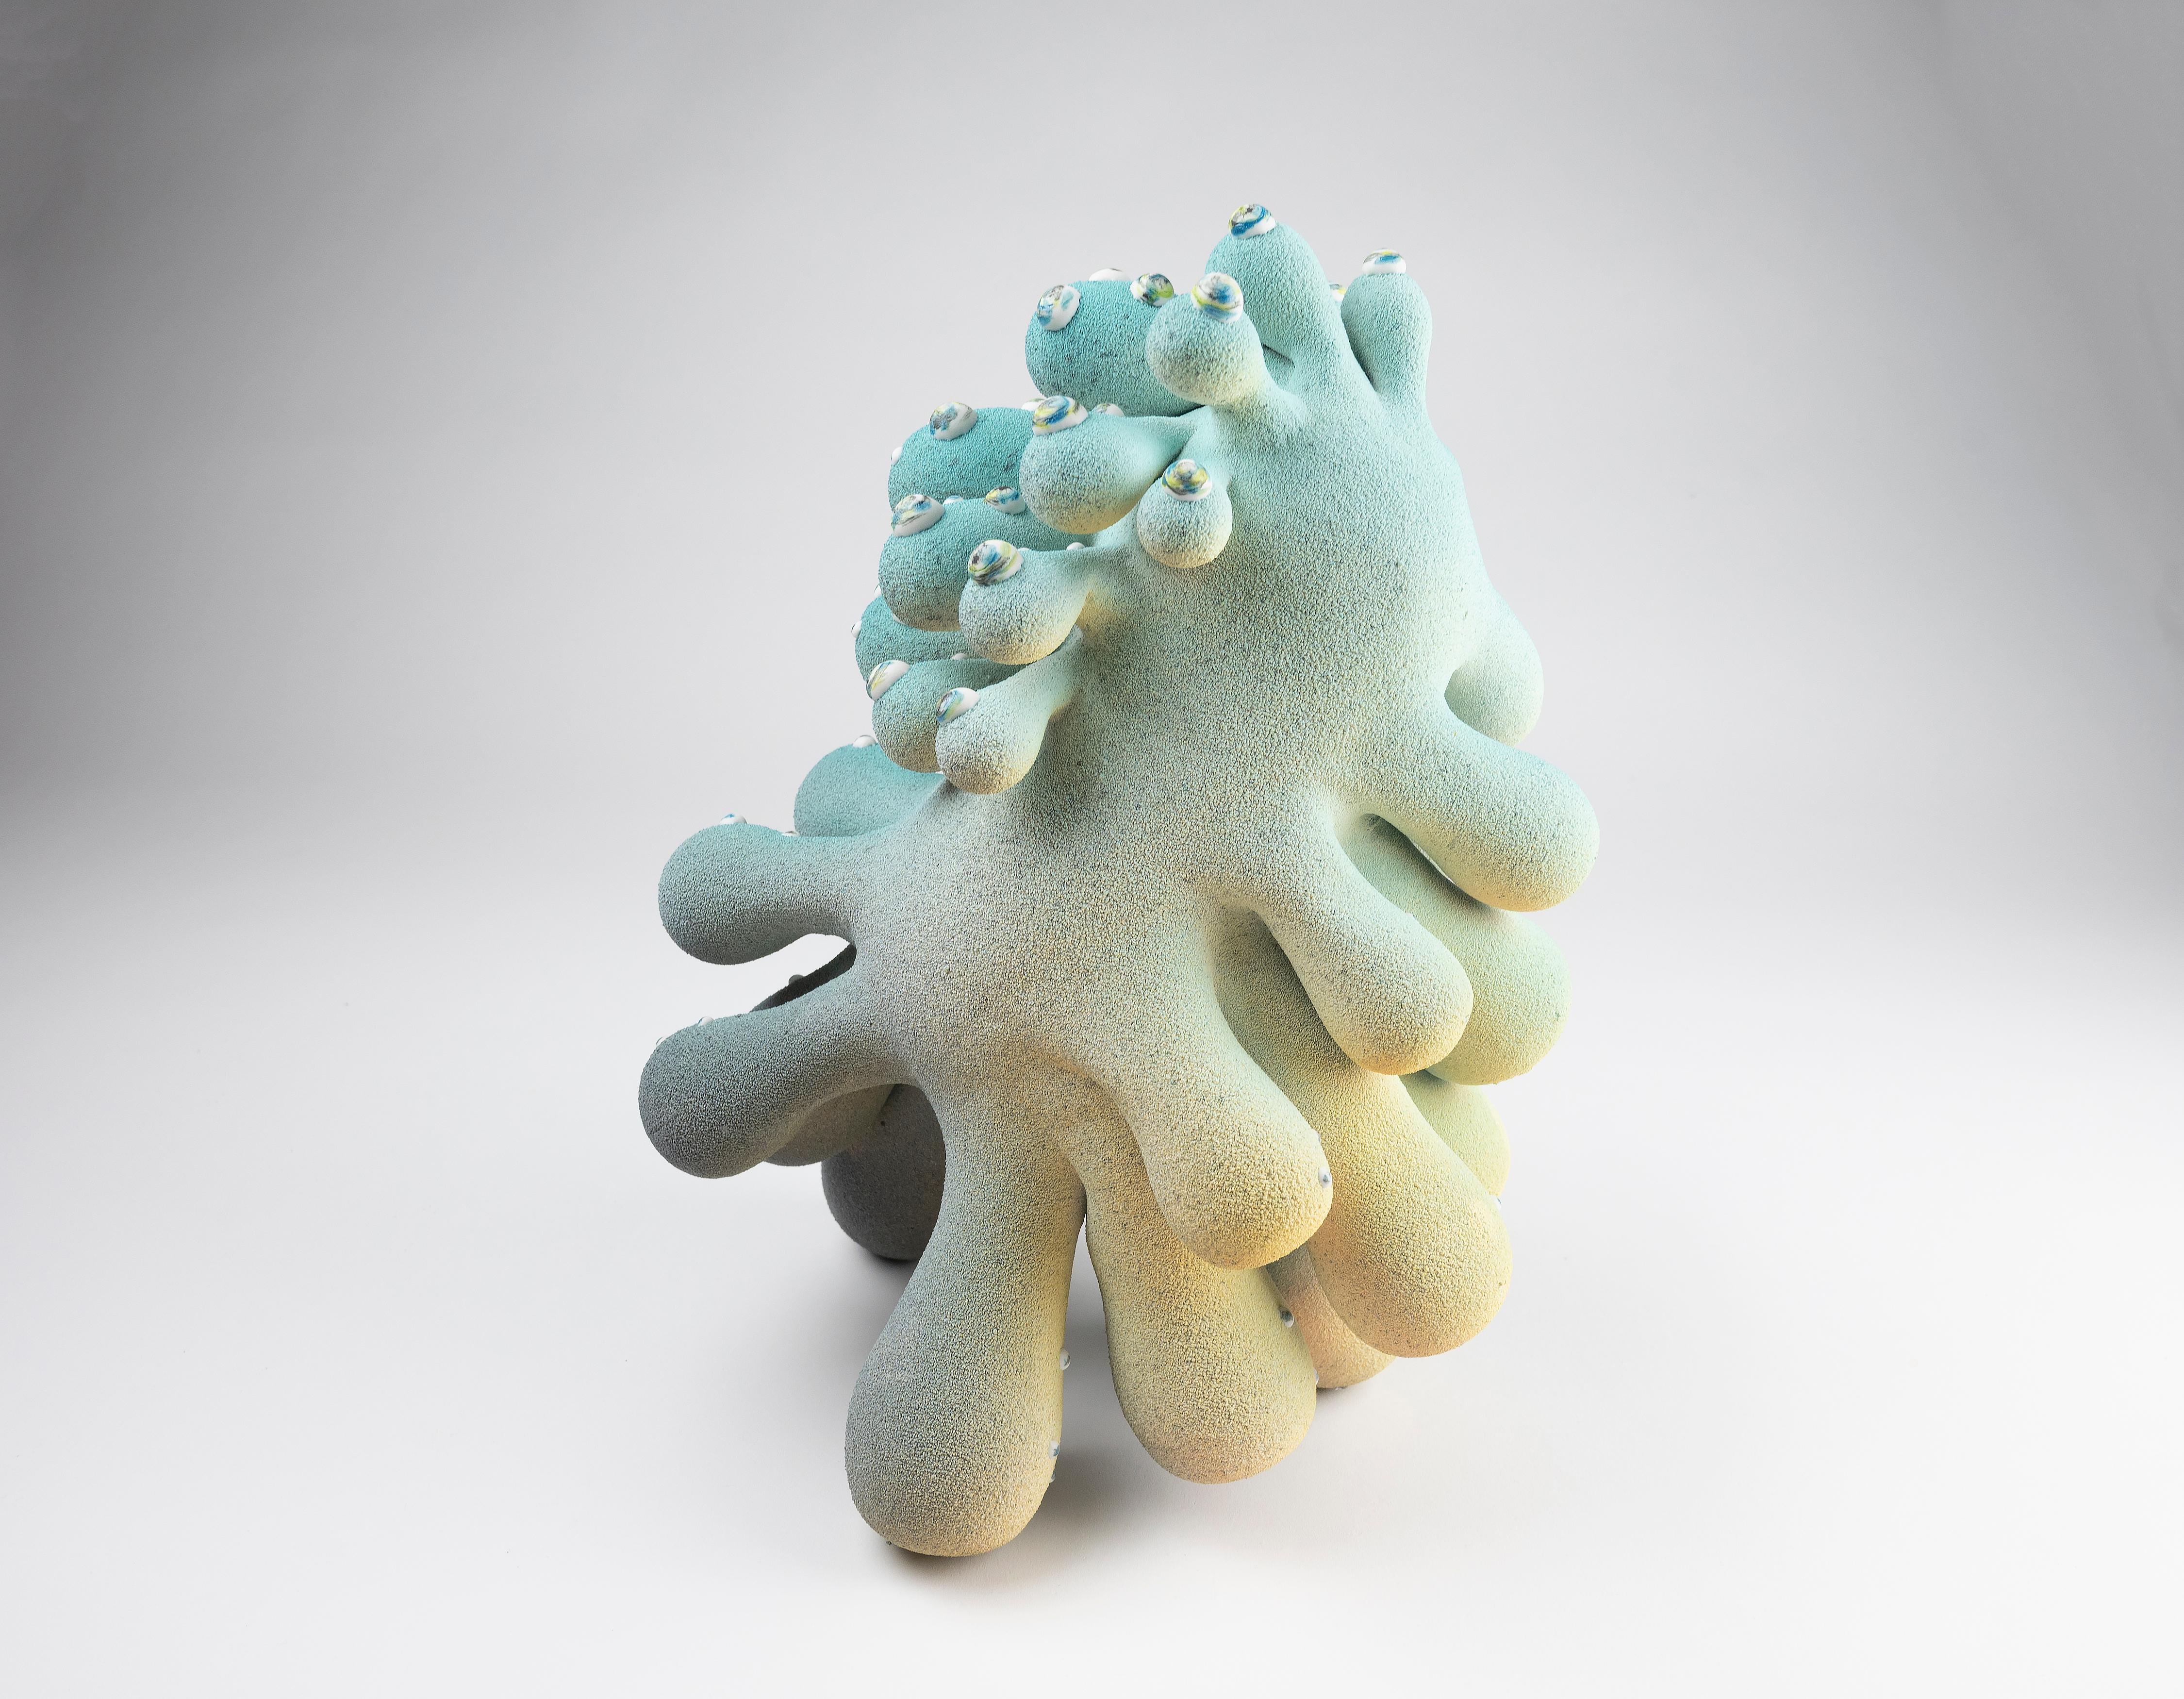 Judy, 2021 (Ceramic, C. 13.5 in. h x 11 in. w x 9.5 in. d, Object No.: 3860)

Toni Losey’s work hums with an underlying current of rhythm and organization.  The repetition found on the wheel influences her work as Losey intuitively builds sculptural